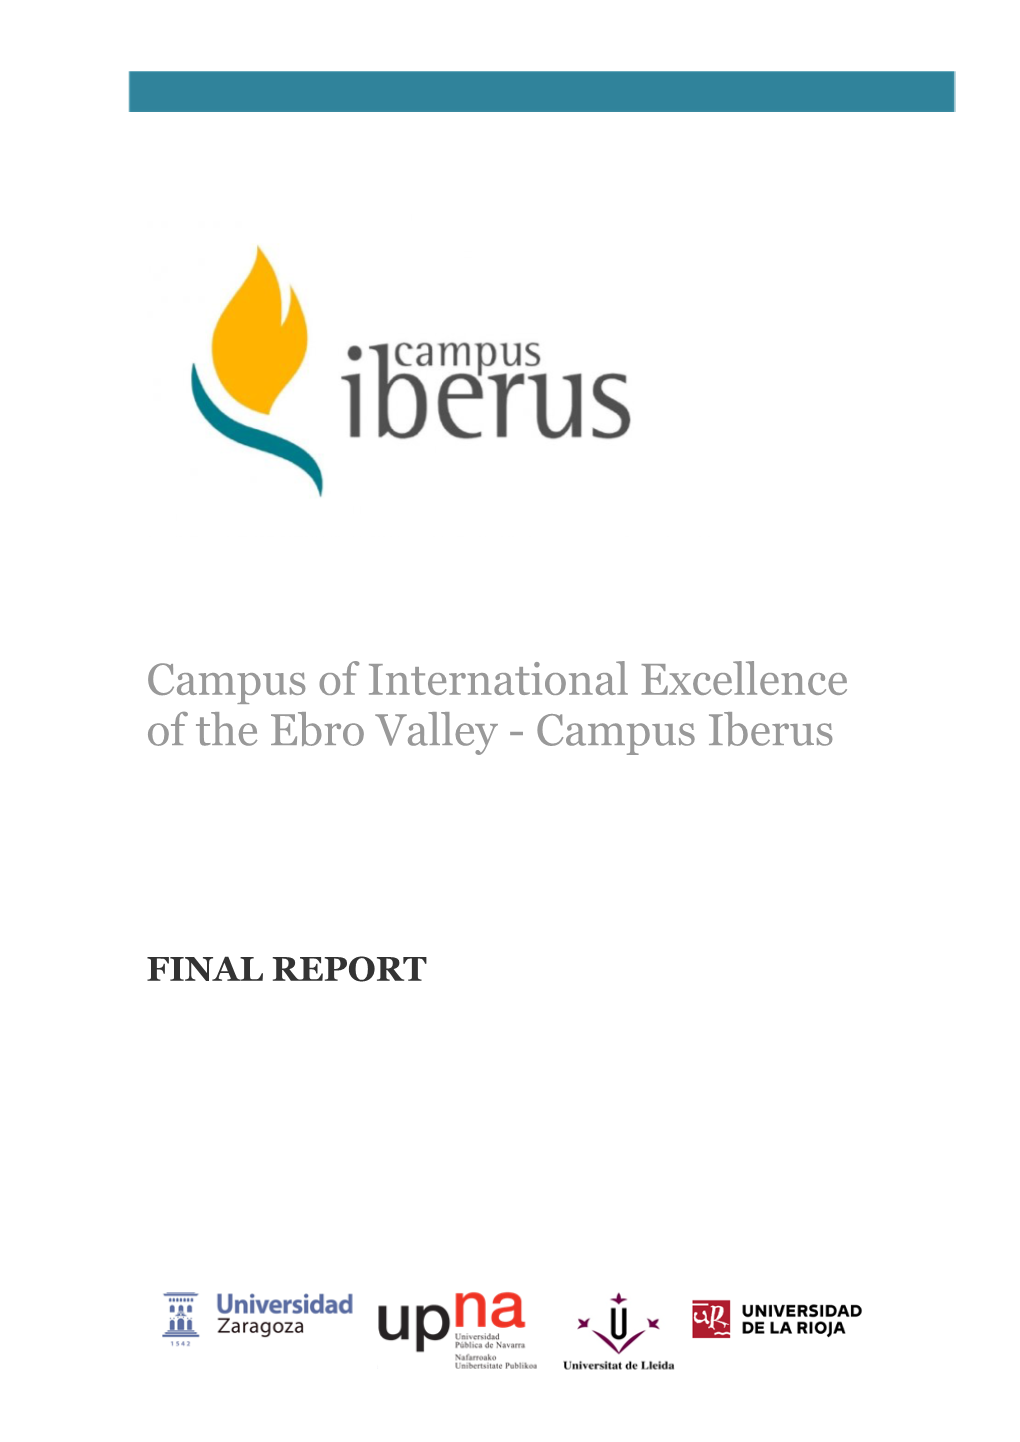 Campus of International Excellence of the Ebro Valley - Campus Iberus